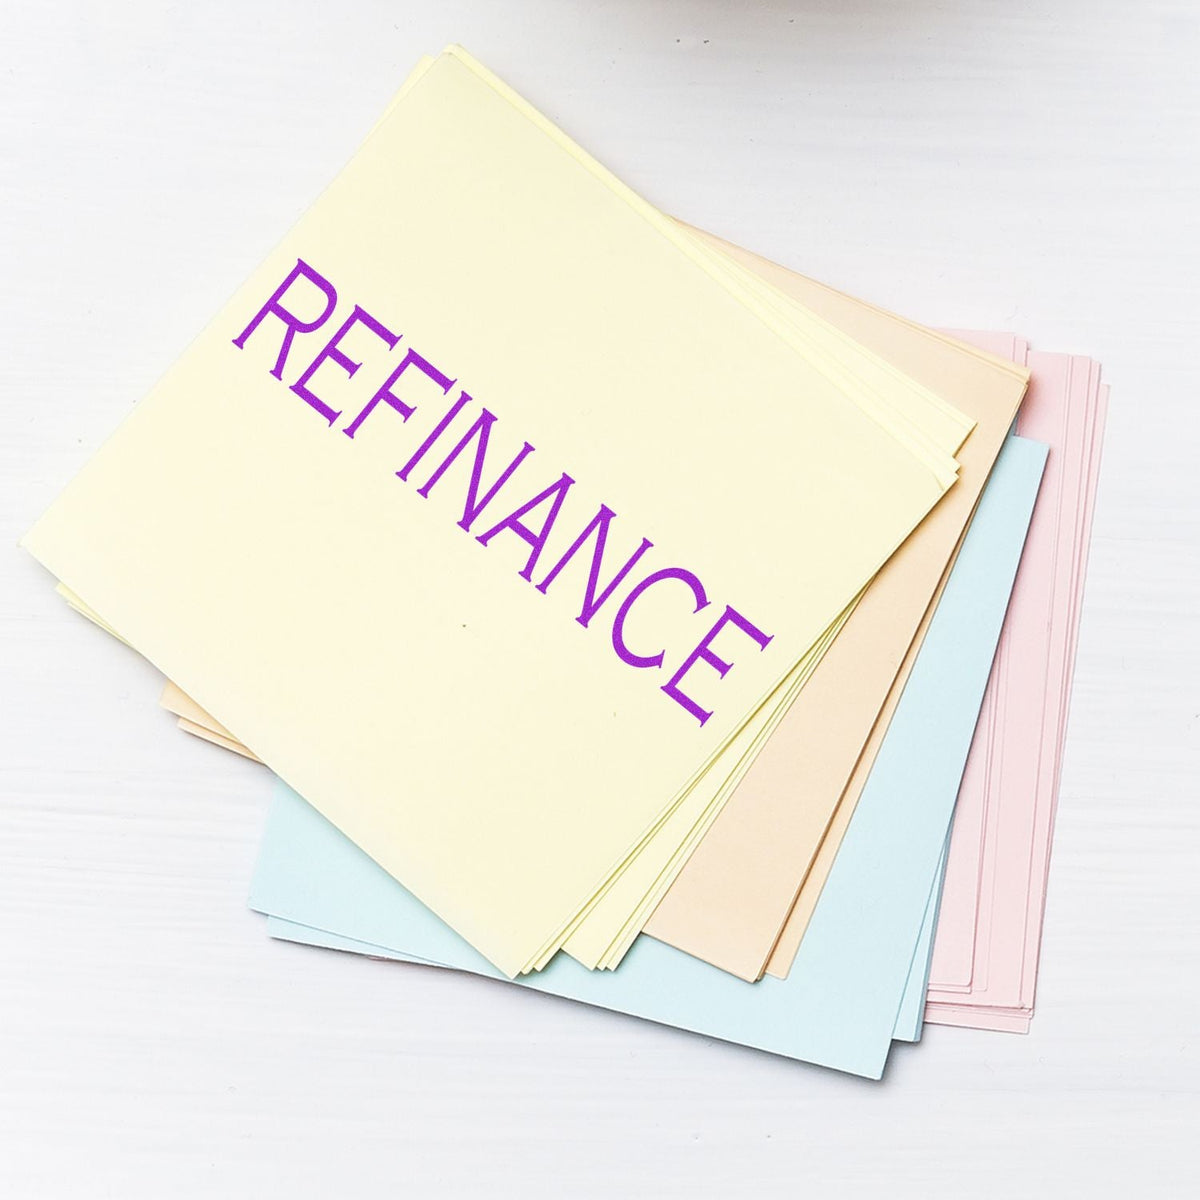 Self Inking Refinance Stamp In Use